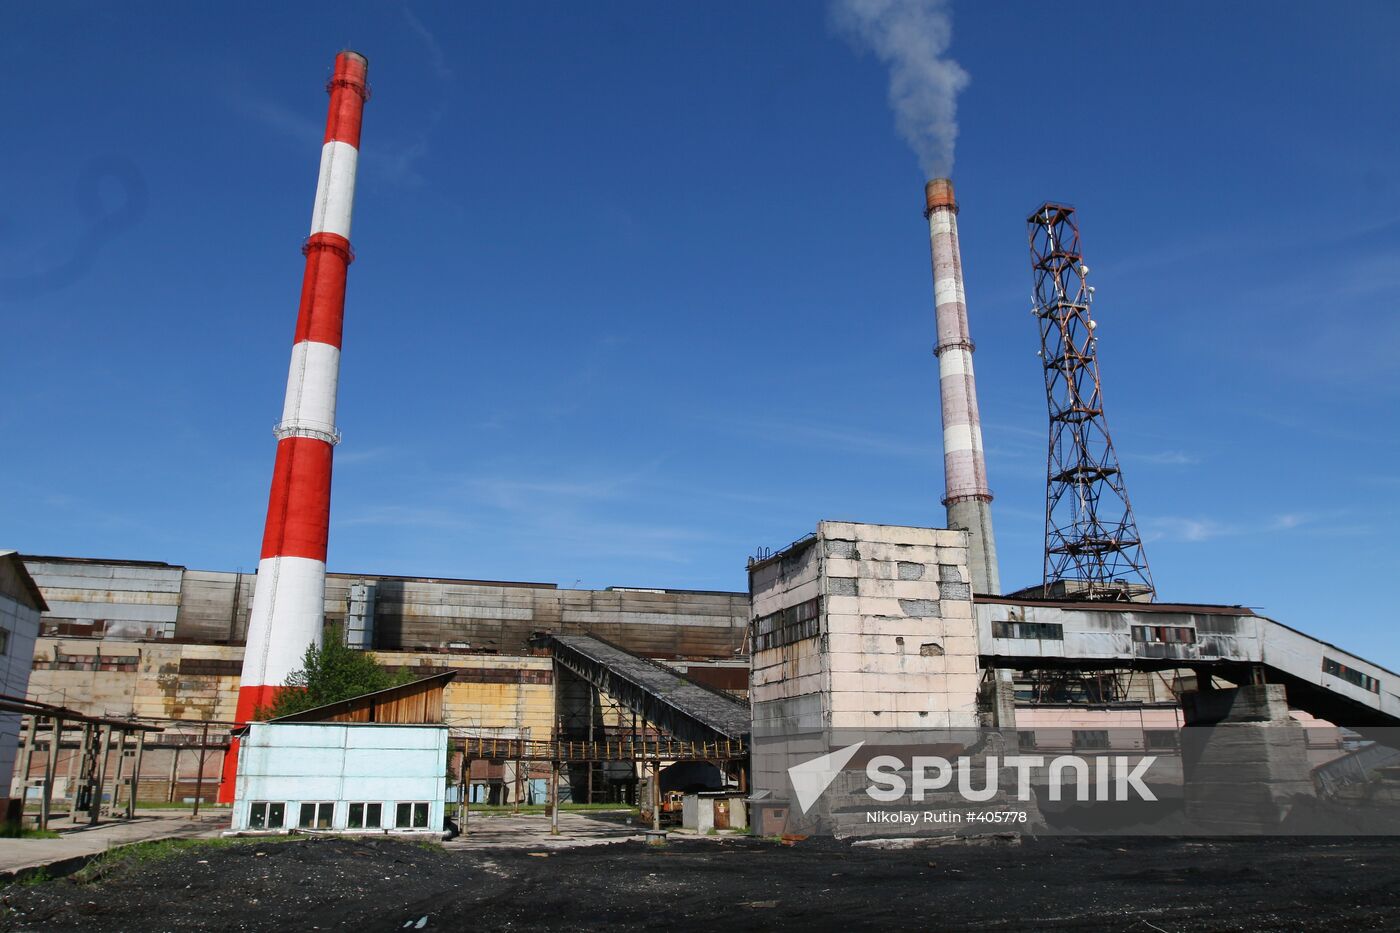 The Baikalsk Pulp and Paper Plant